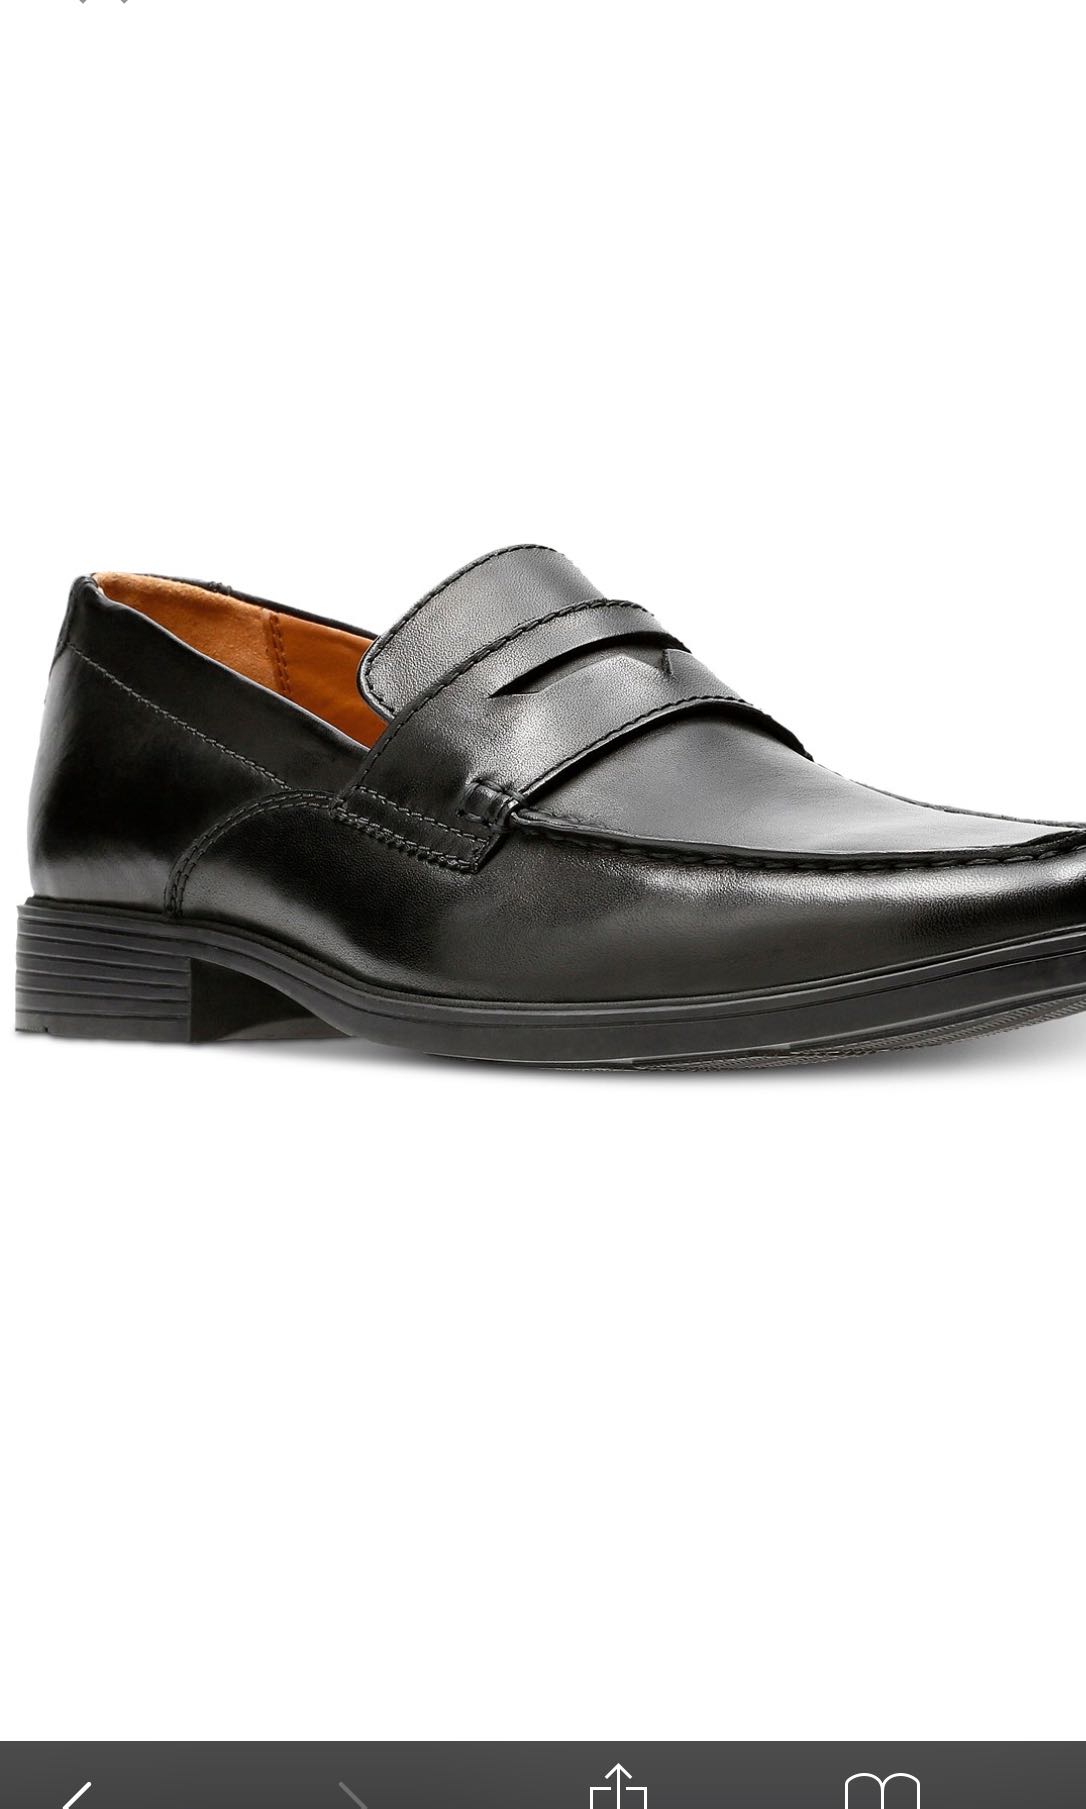 plus size loafers